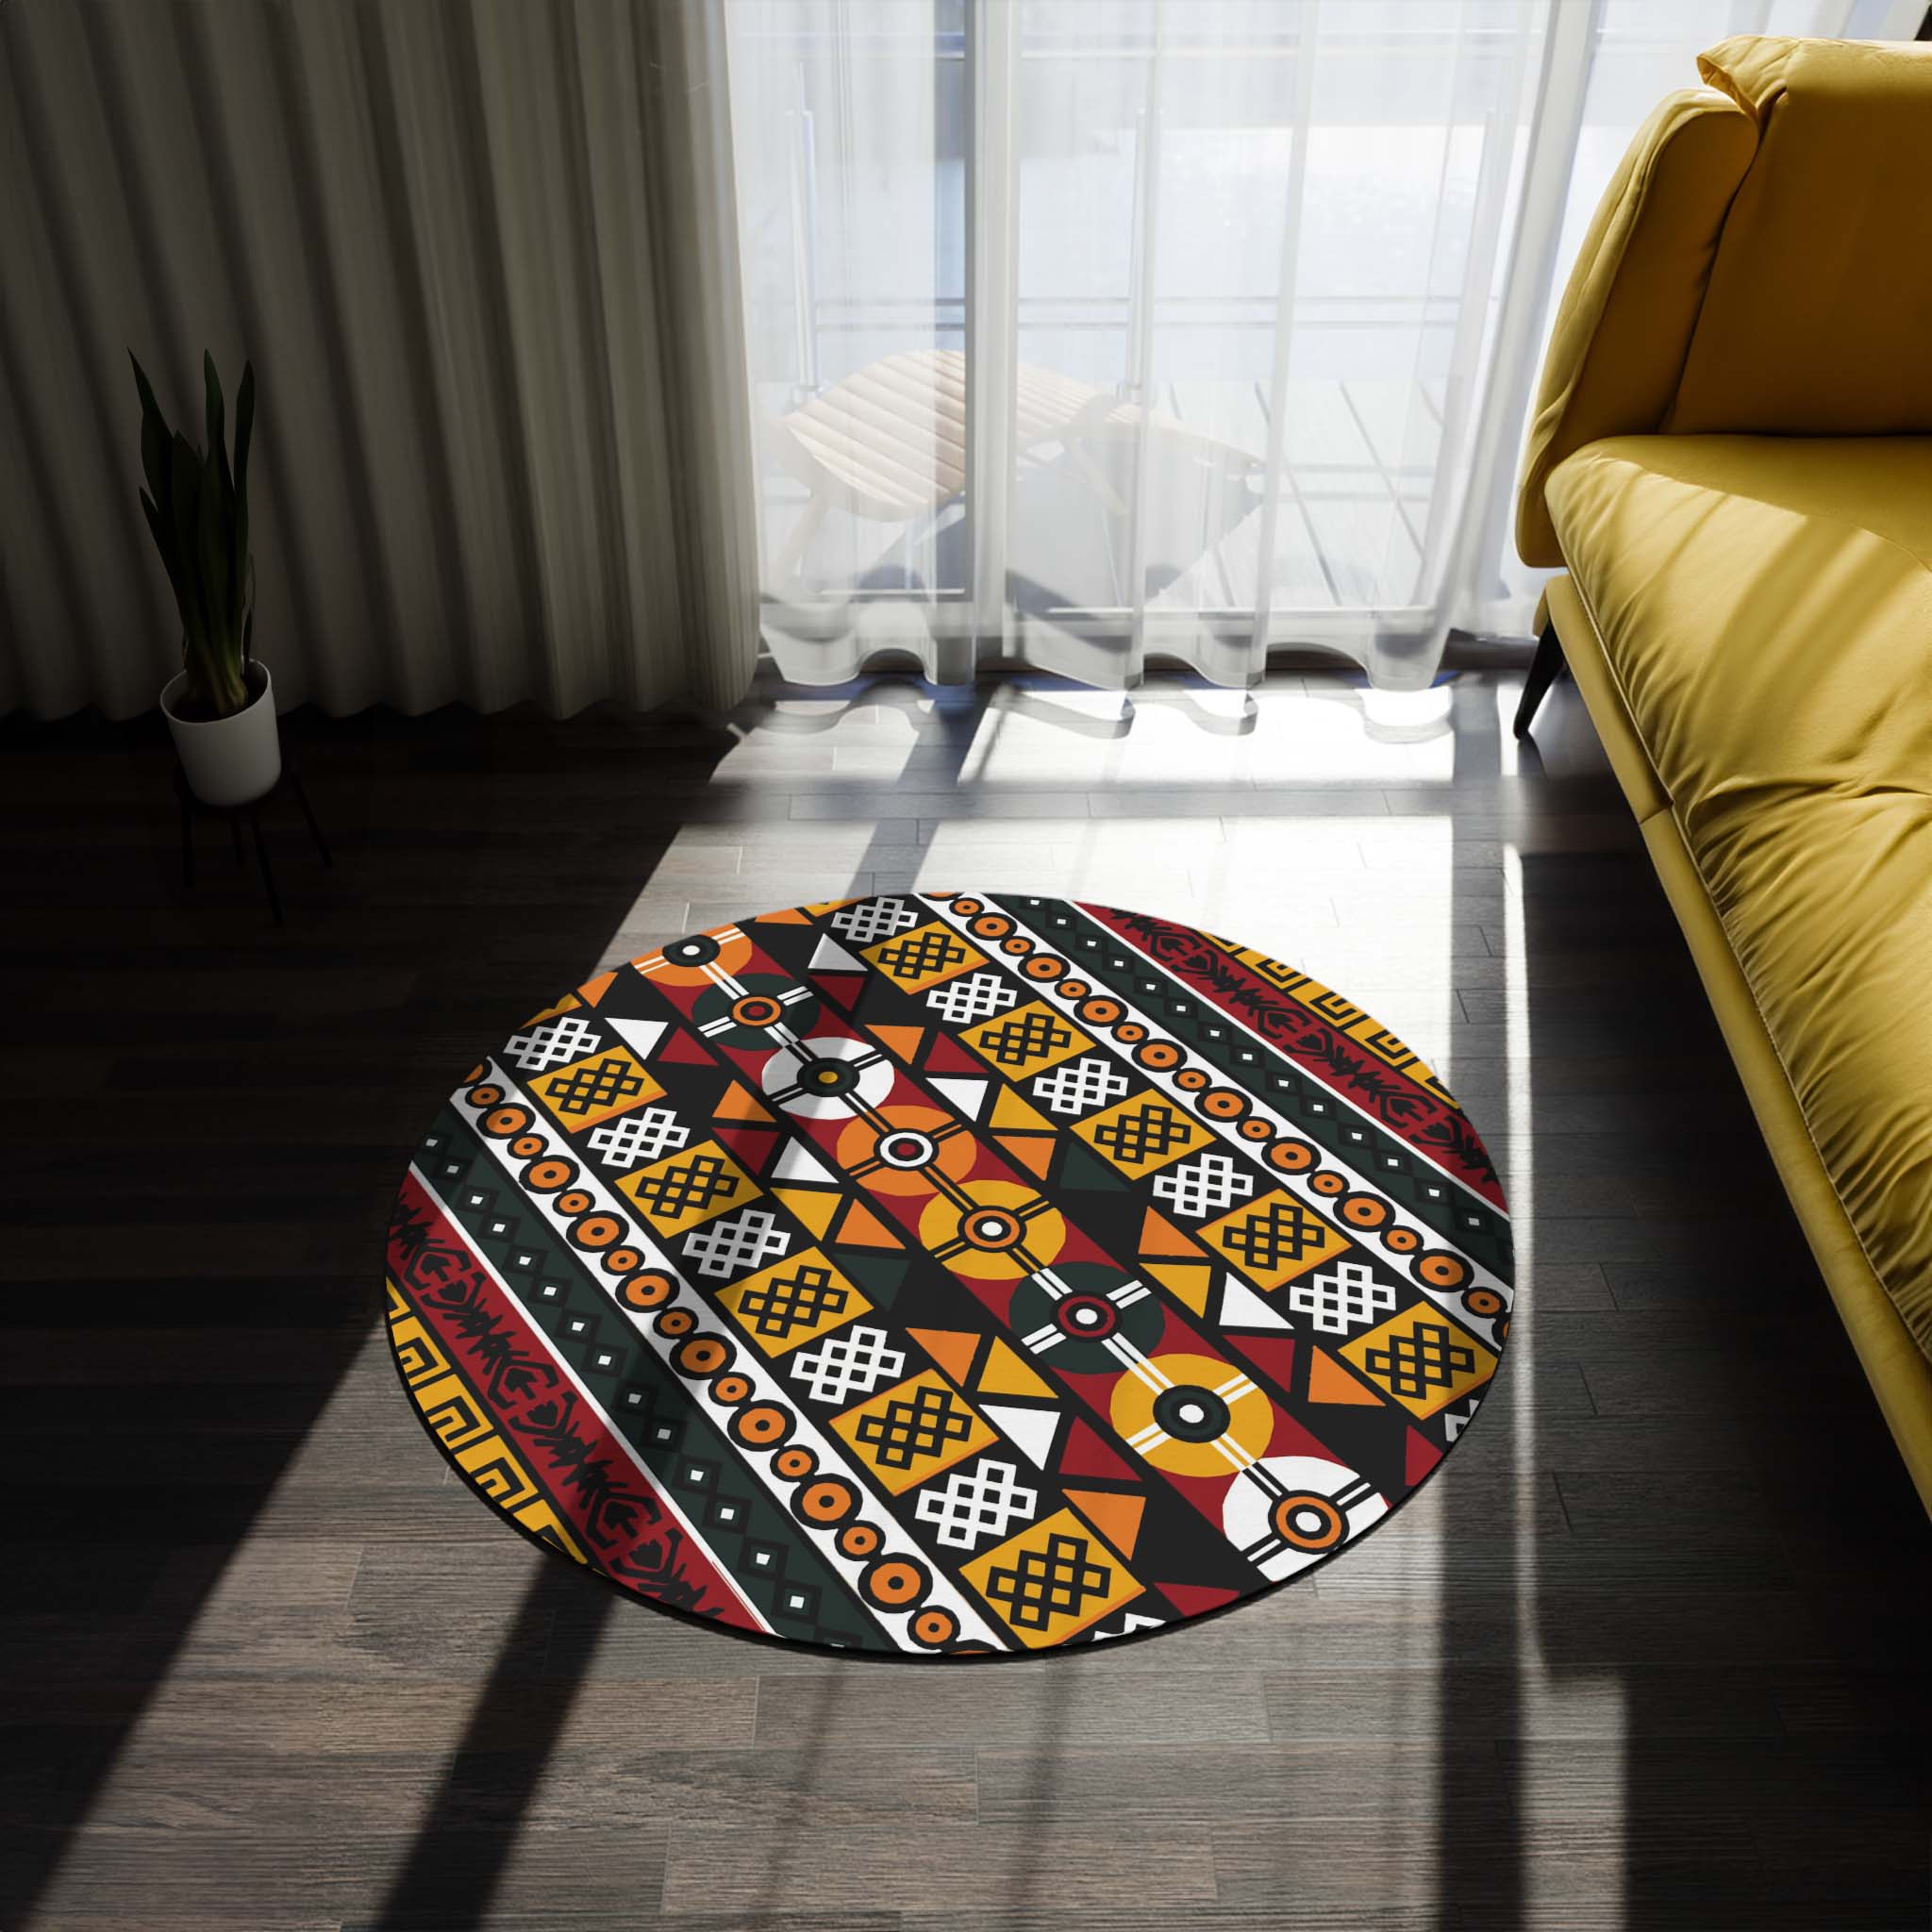 African Print Round Area Rugs Mudcloth Carpet - Bynelo